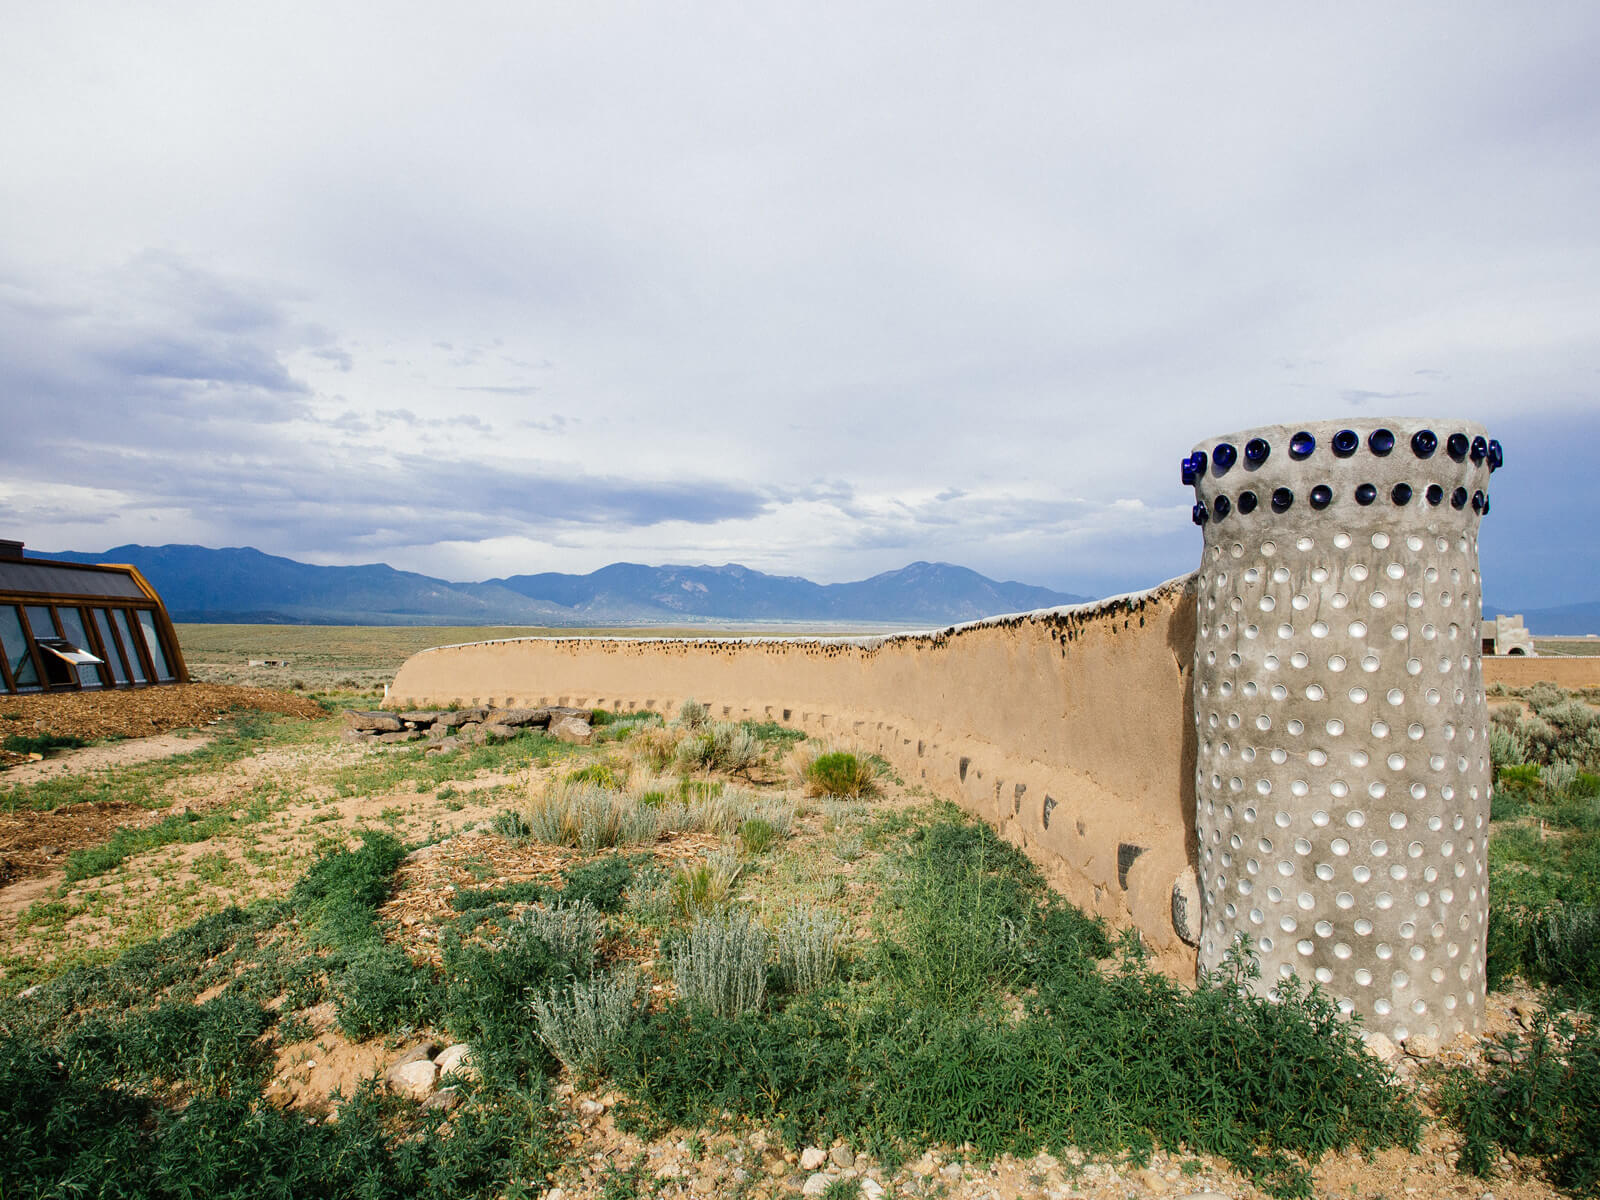 Adobe mud wall made from recycled cans and bottles